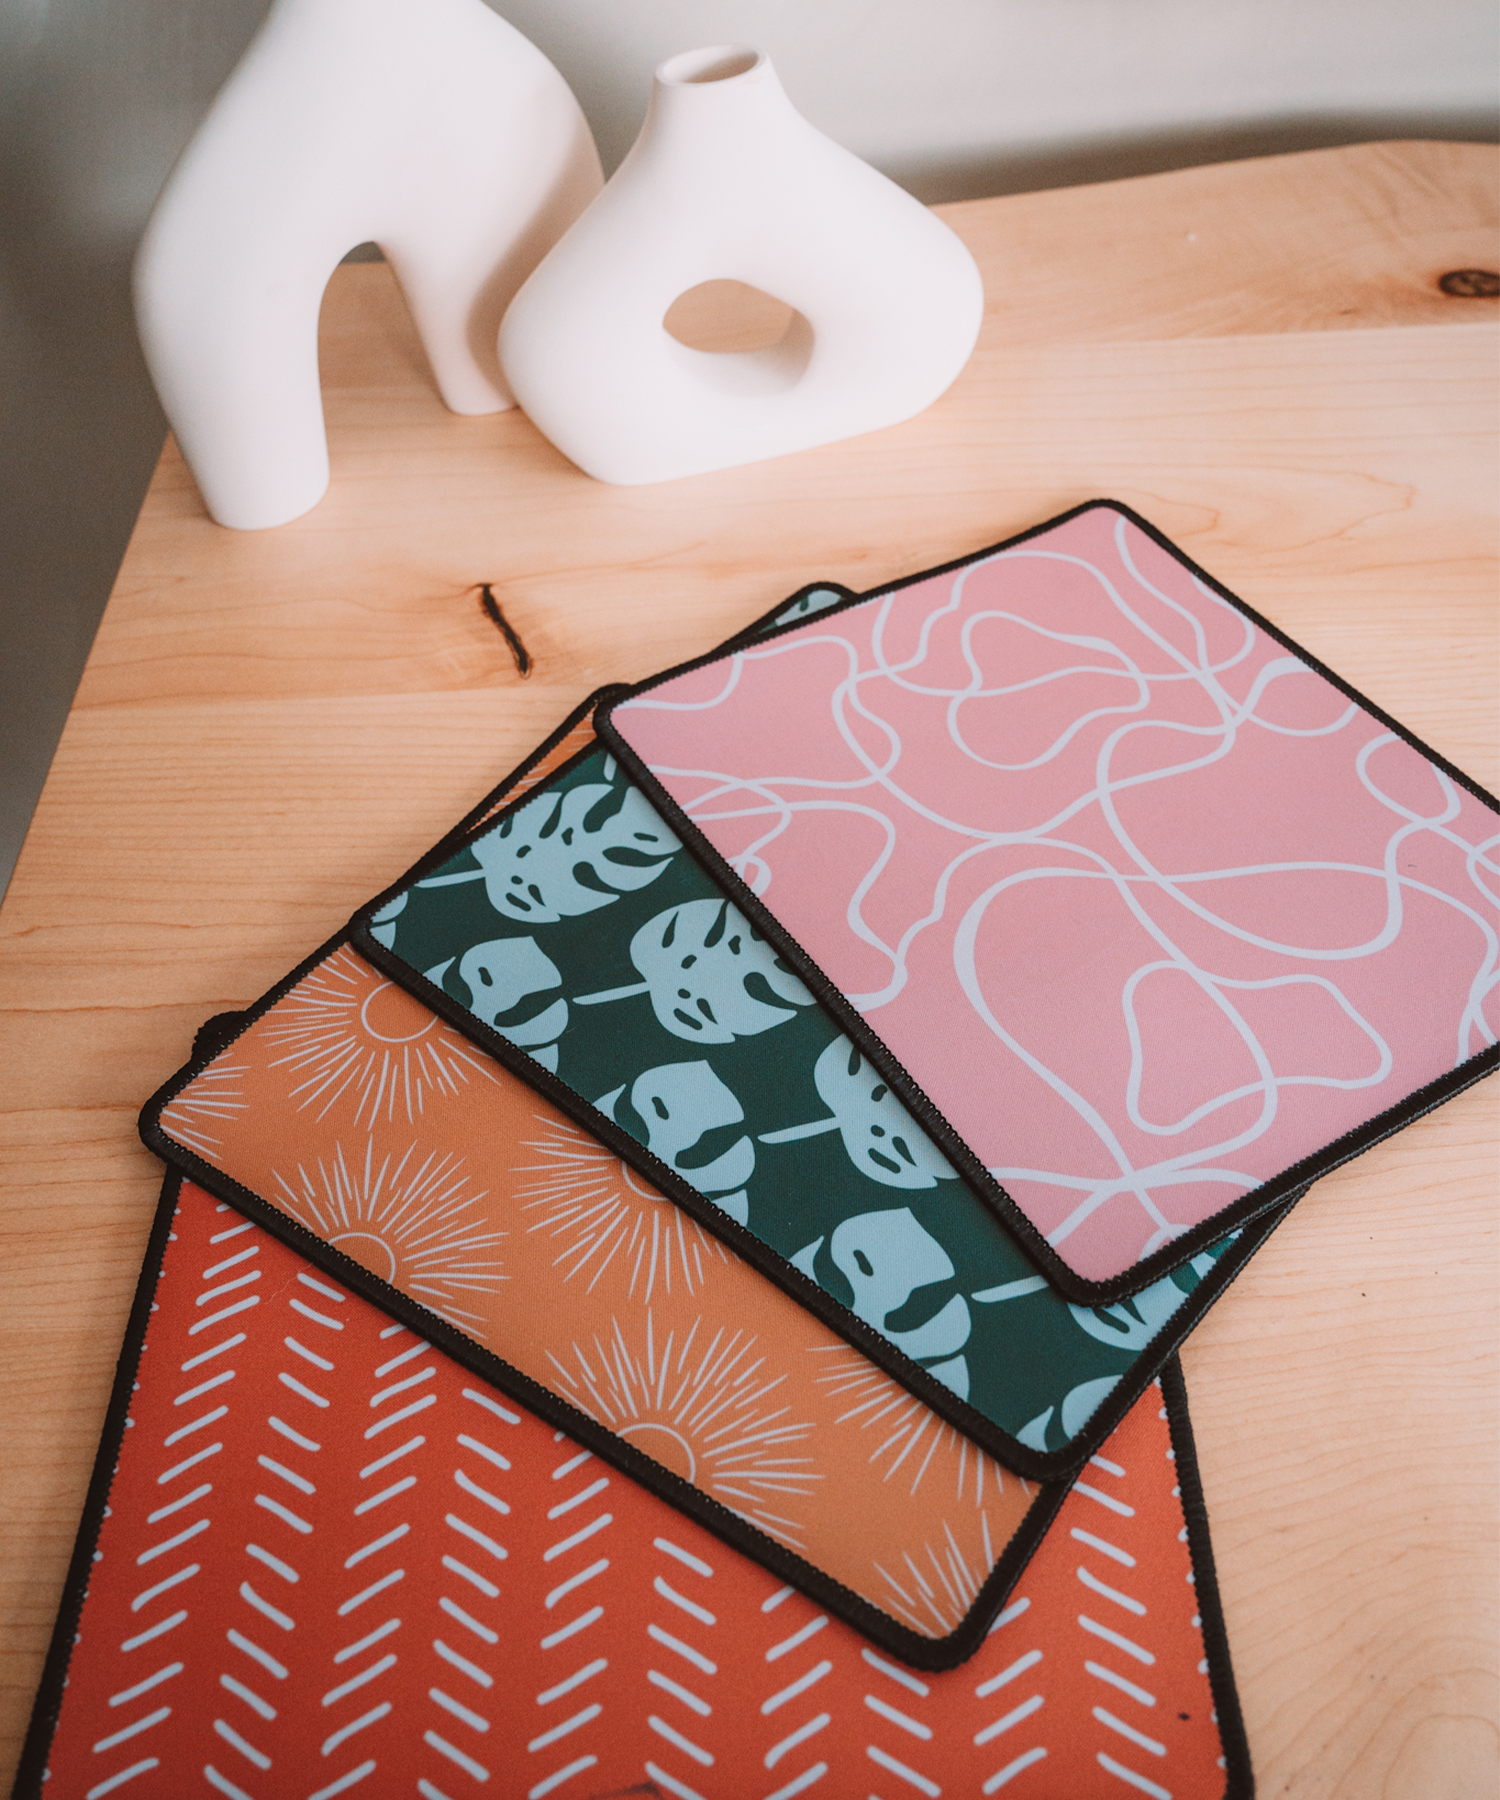 All mousepads are laying on a desk with two asymmetrical vases in the background. In order: Terrain, Monstera, Soleil, and Harrow.